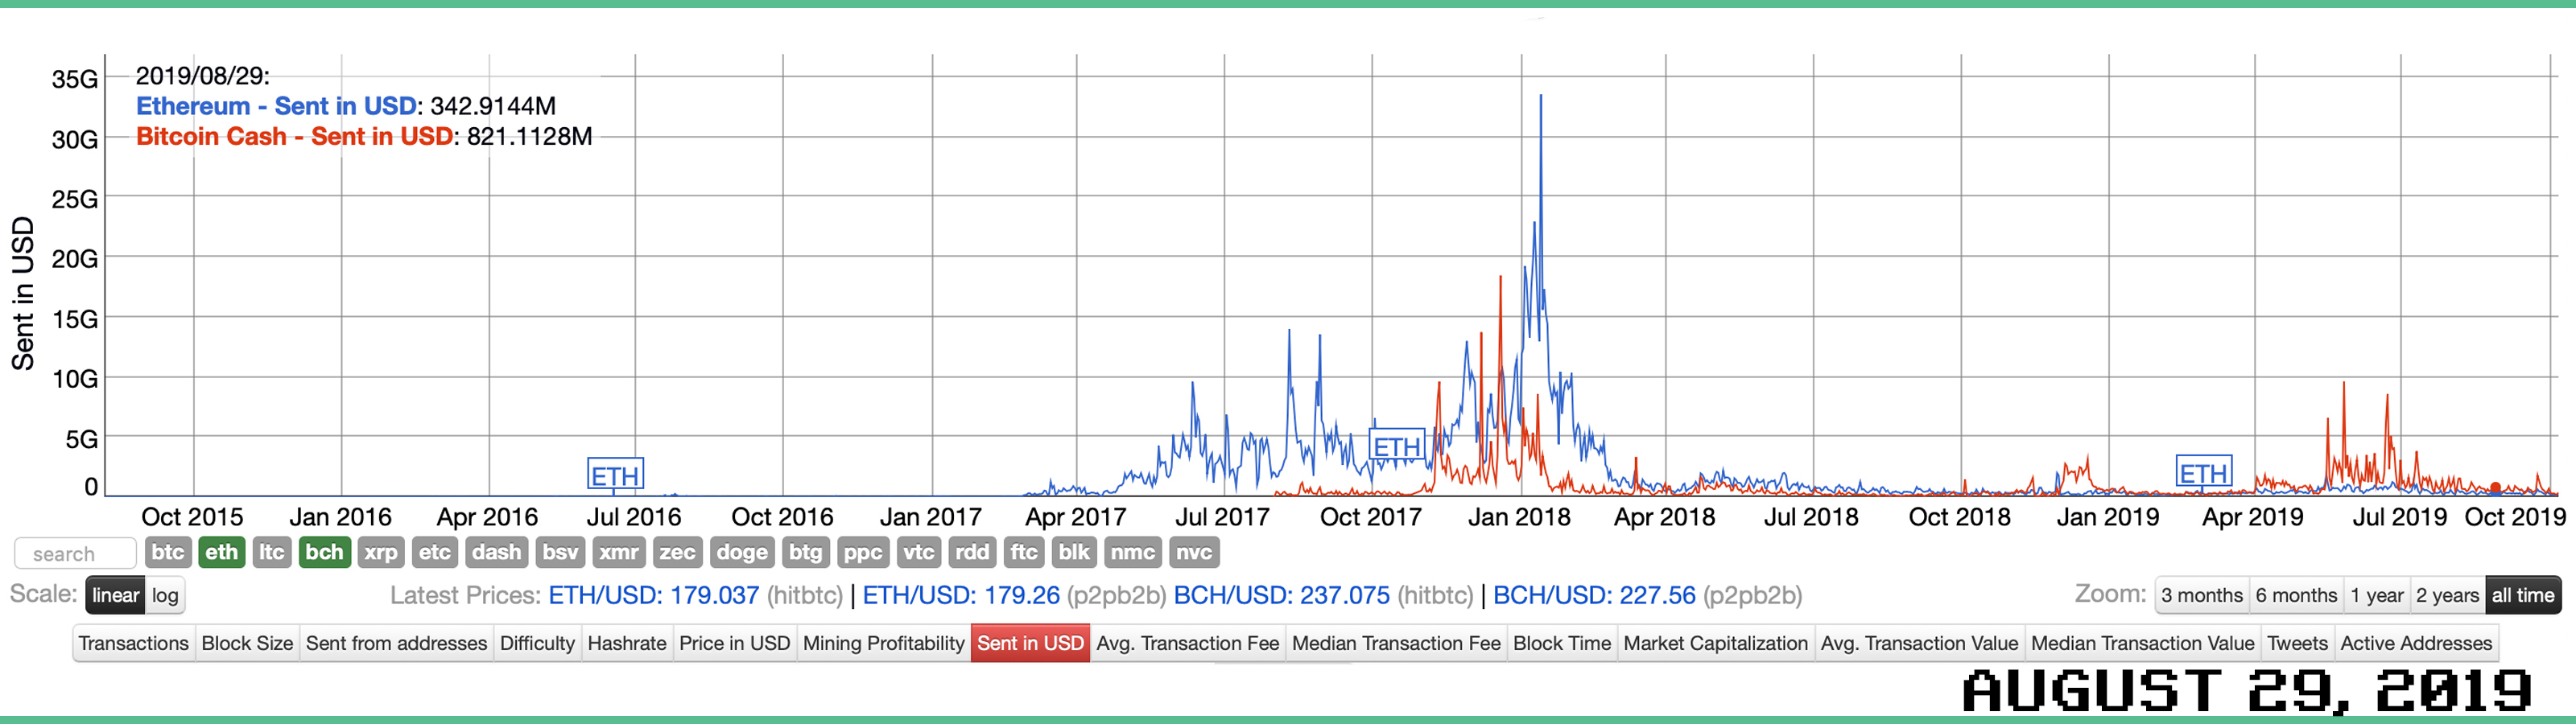 Bitcoin Cash Price History Chart - All BCH Historical Data